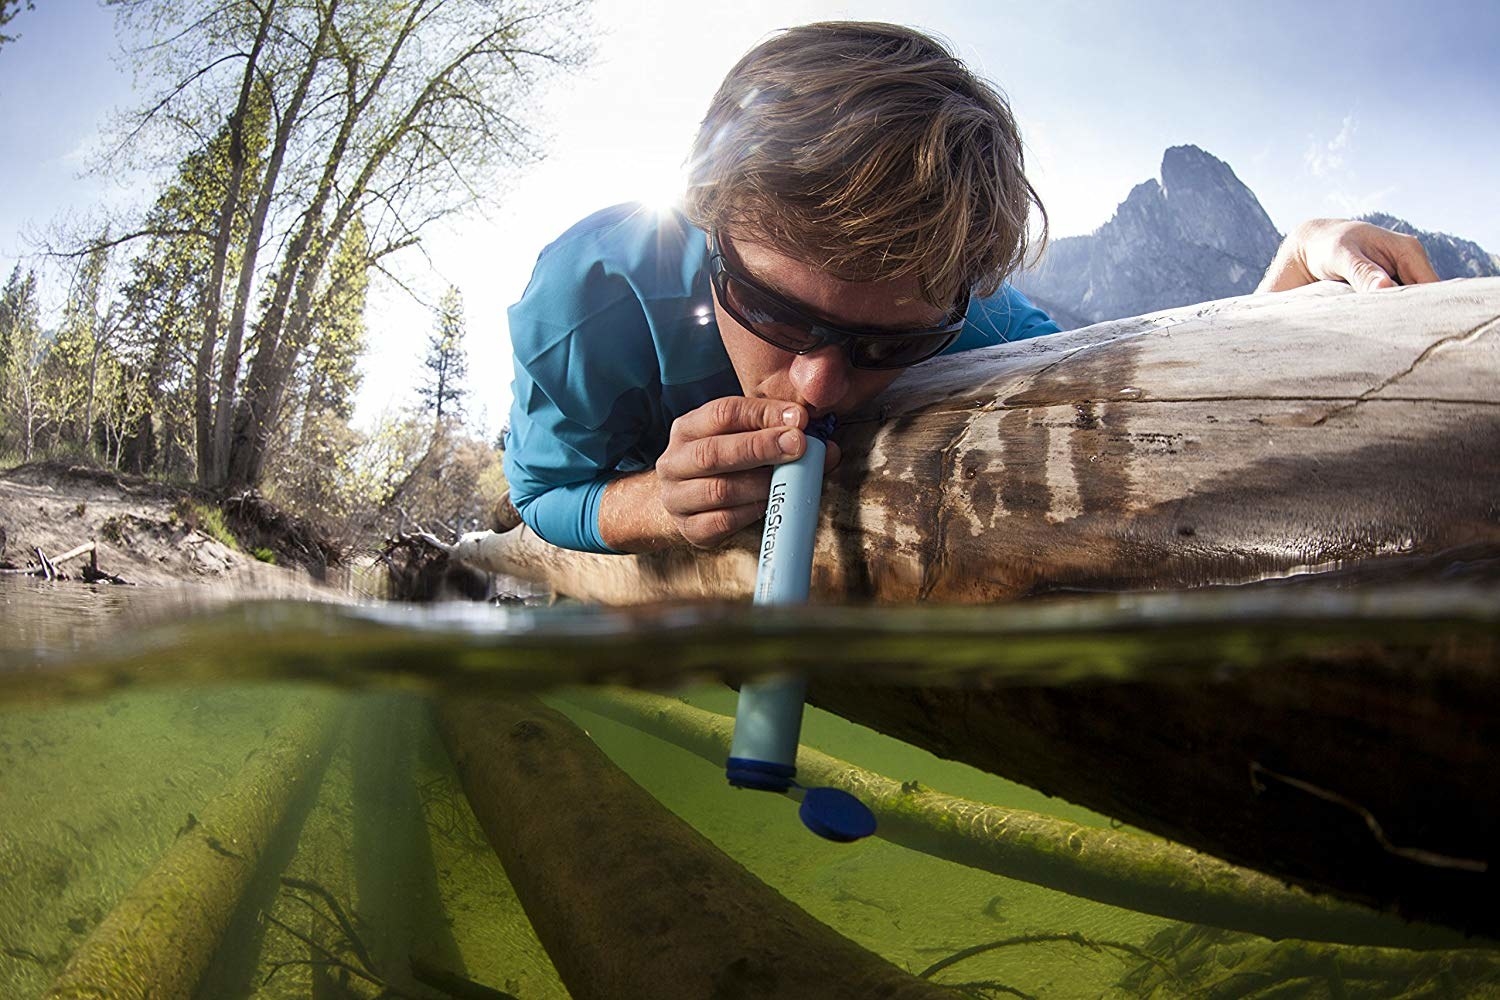 model using the straw to drink from a grimy river